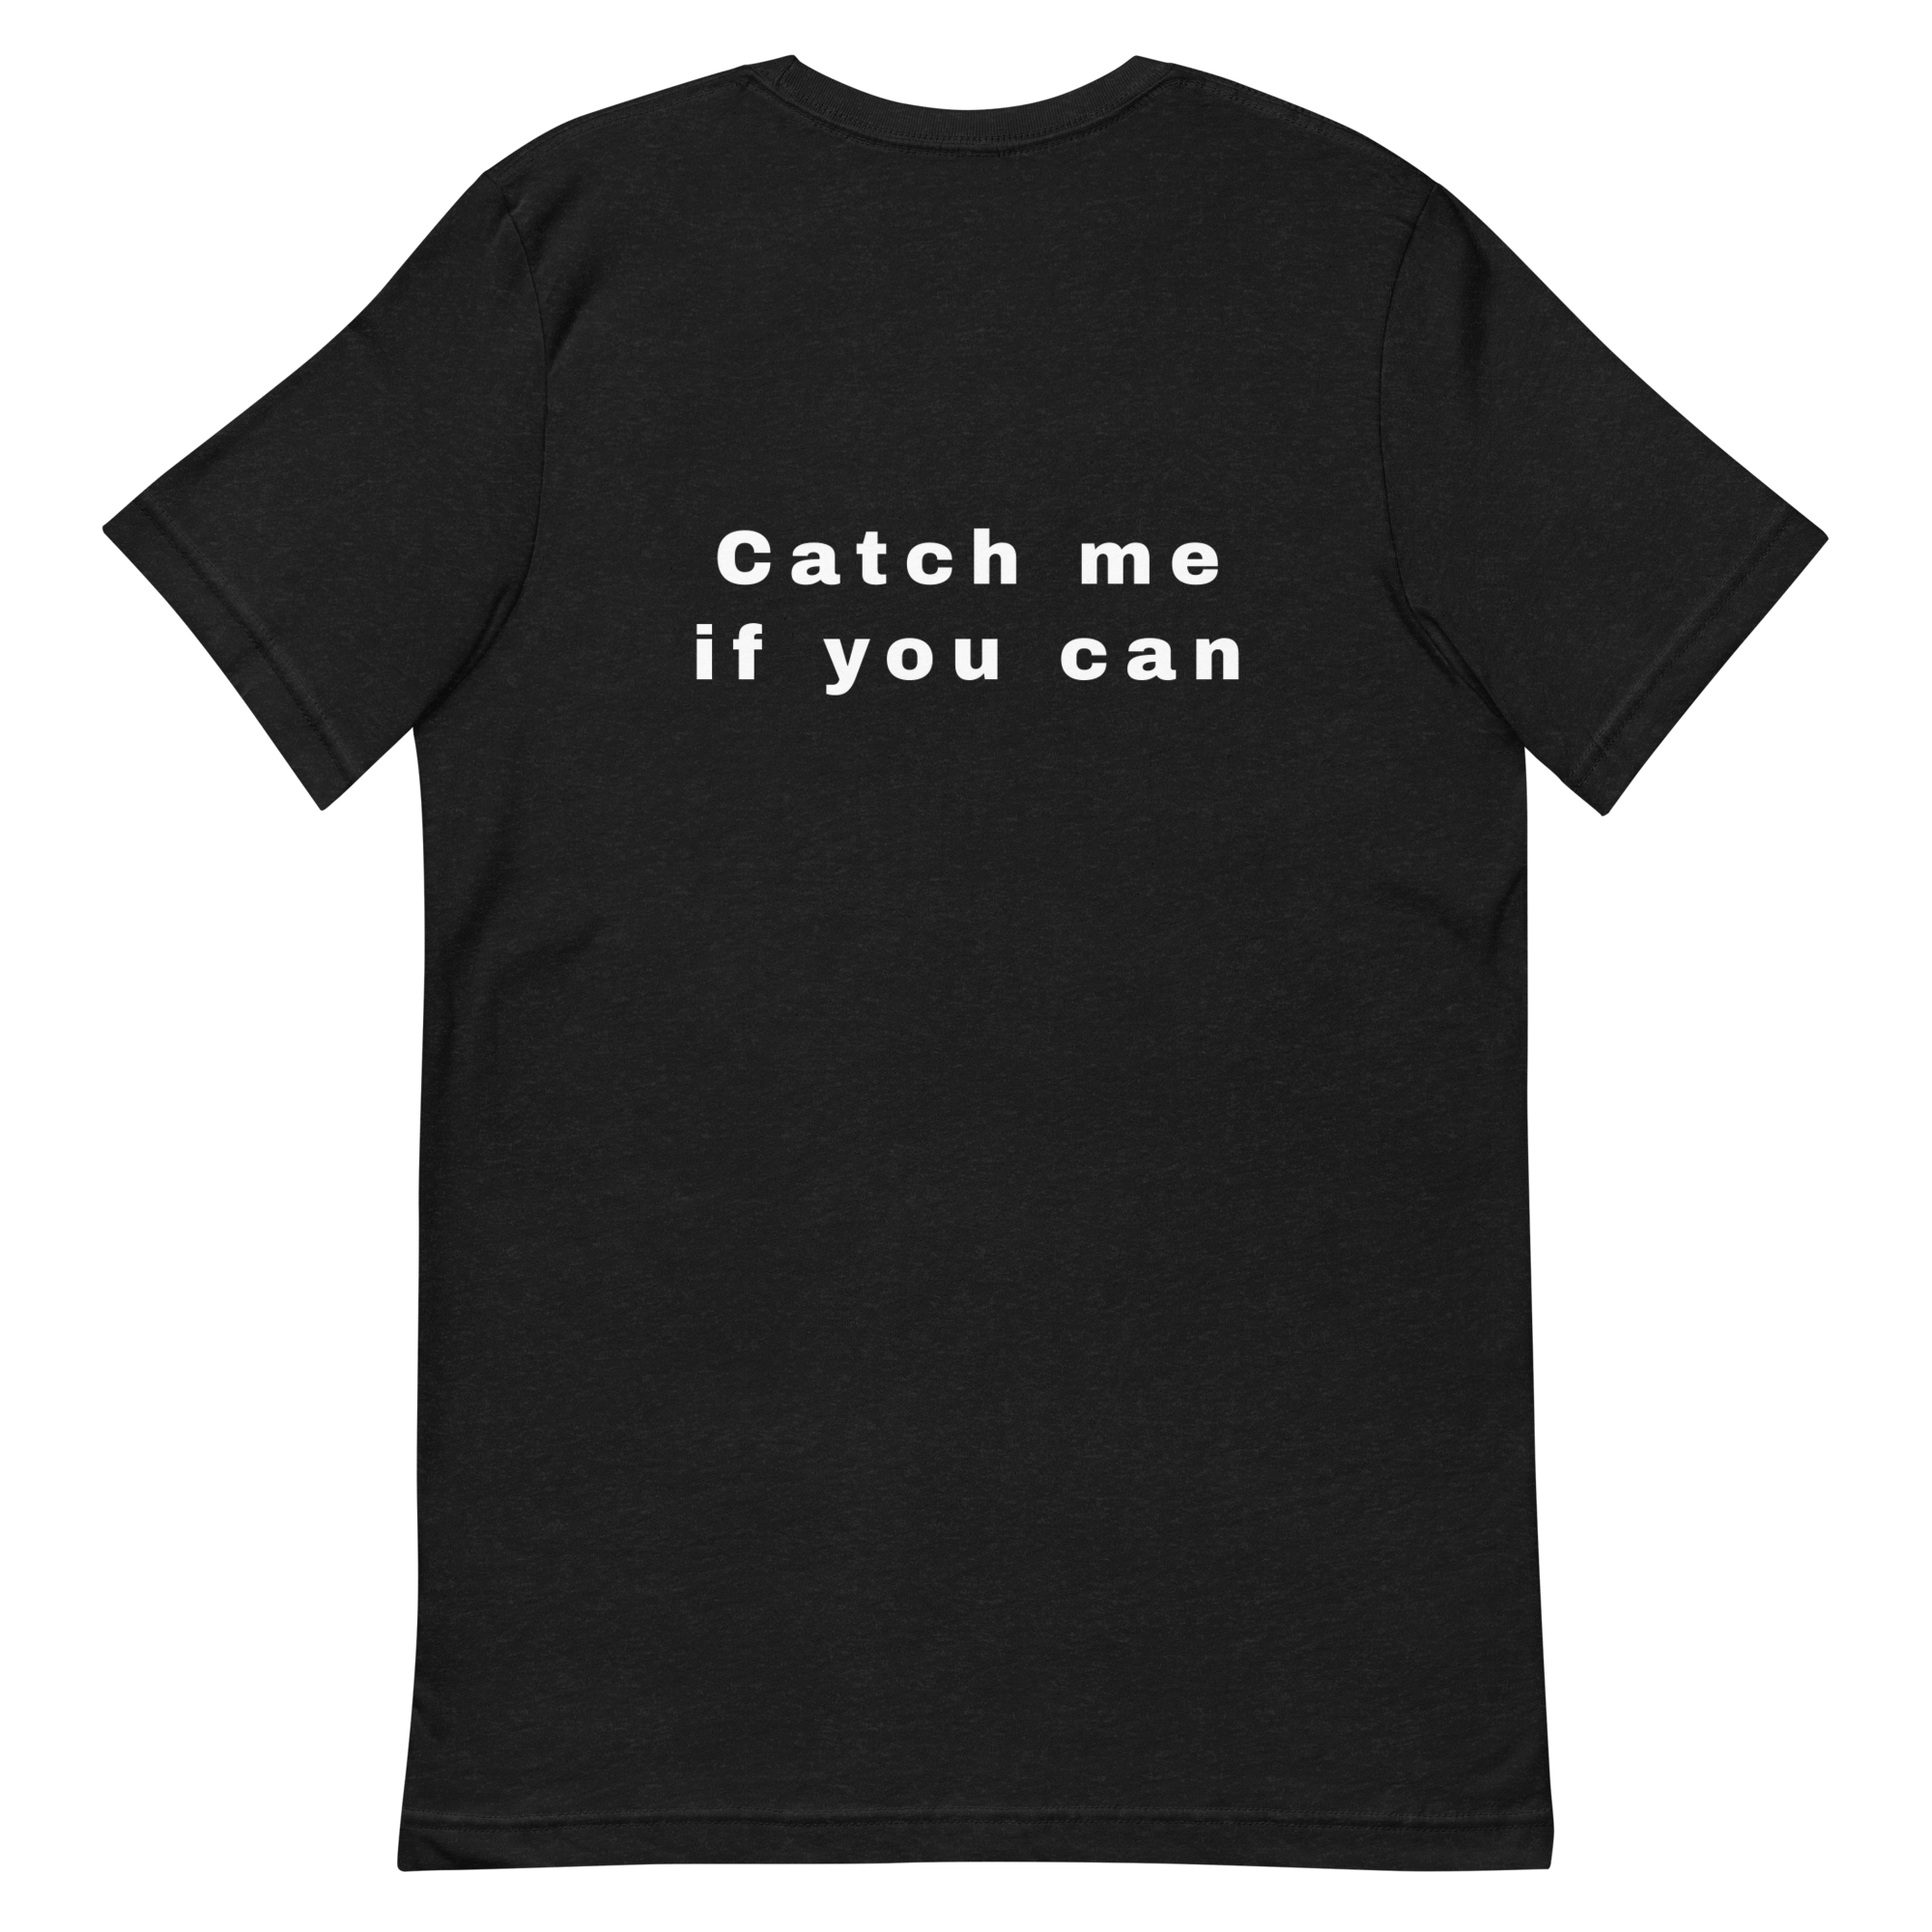 Unisex-T-Shirt Catch me if you can